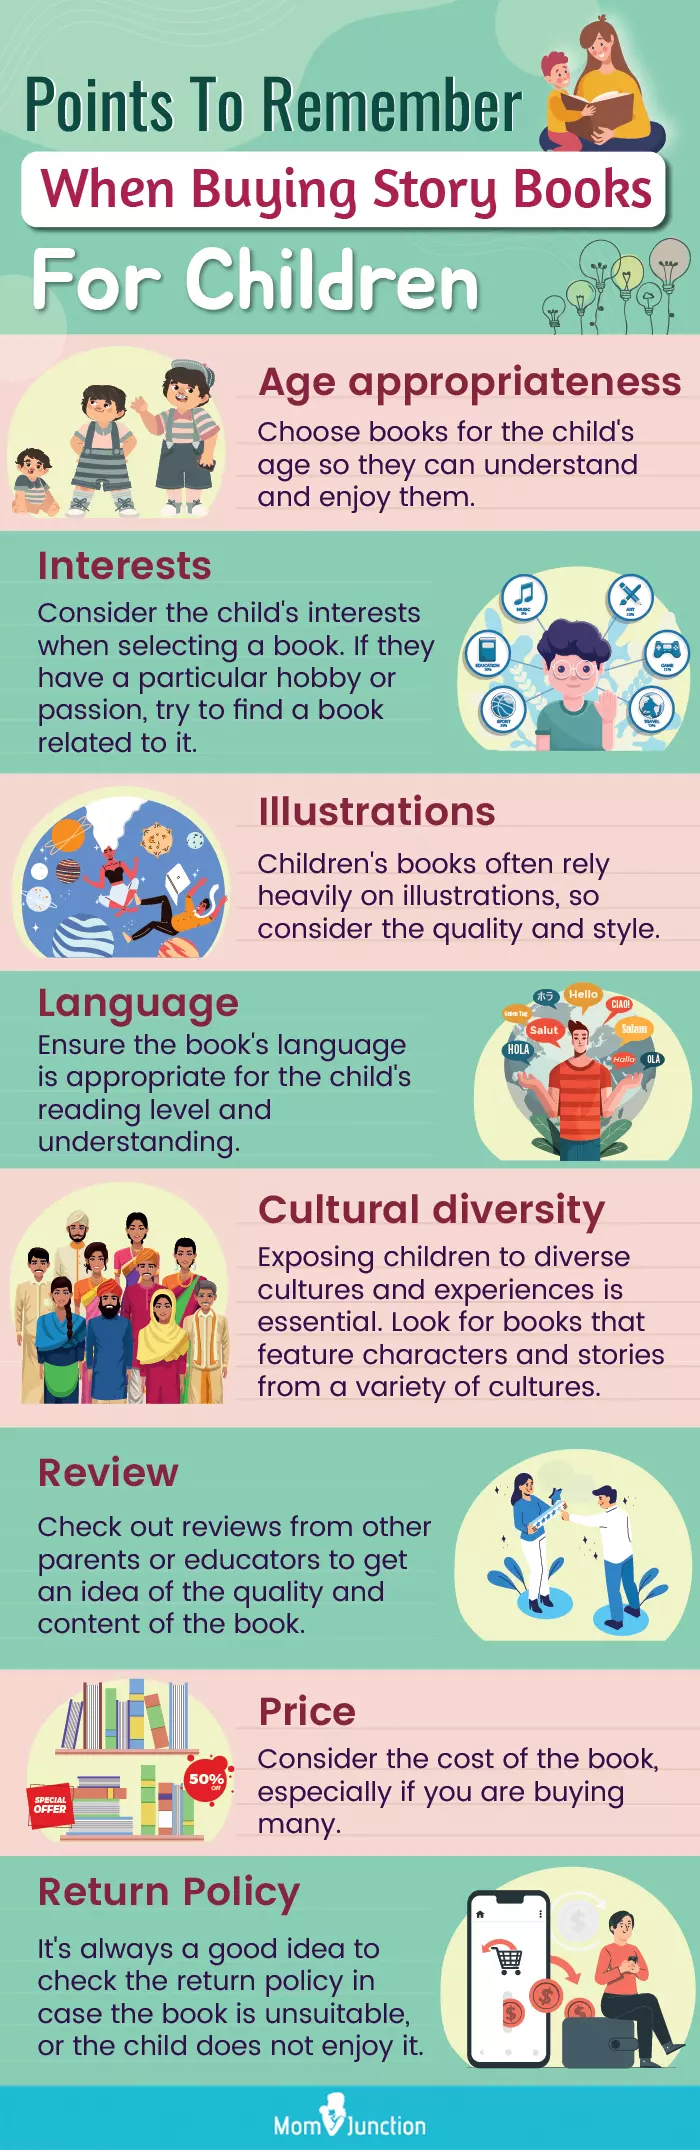 Points To Remember When Buying Story Books For Children (infographic)